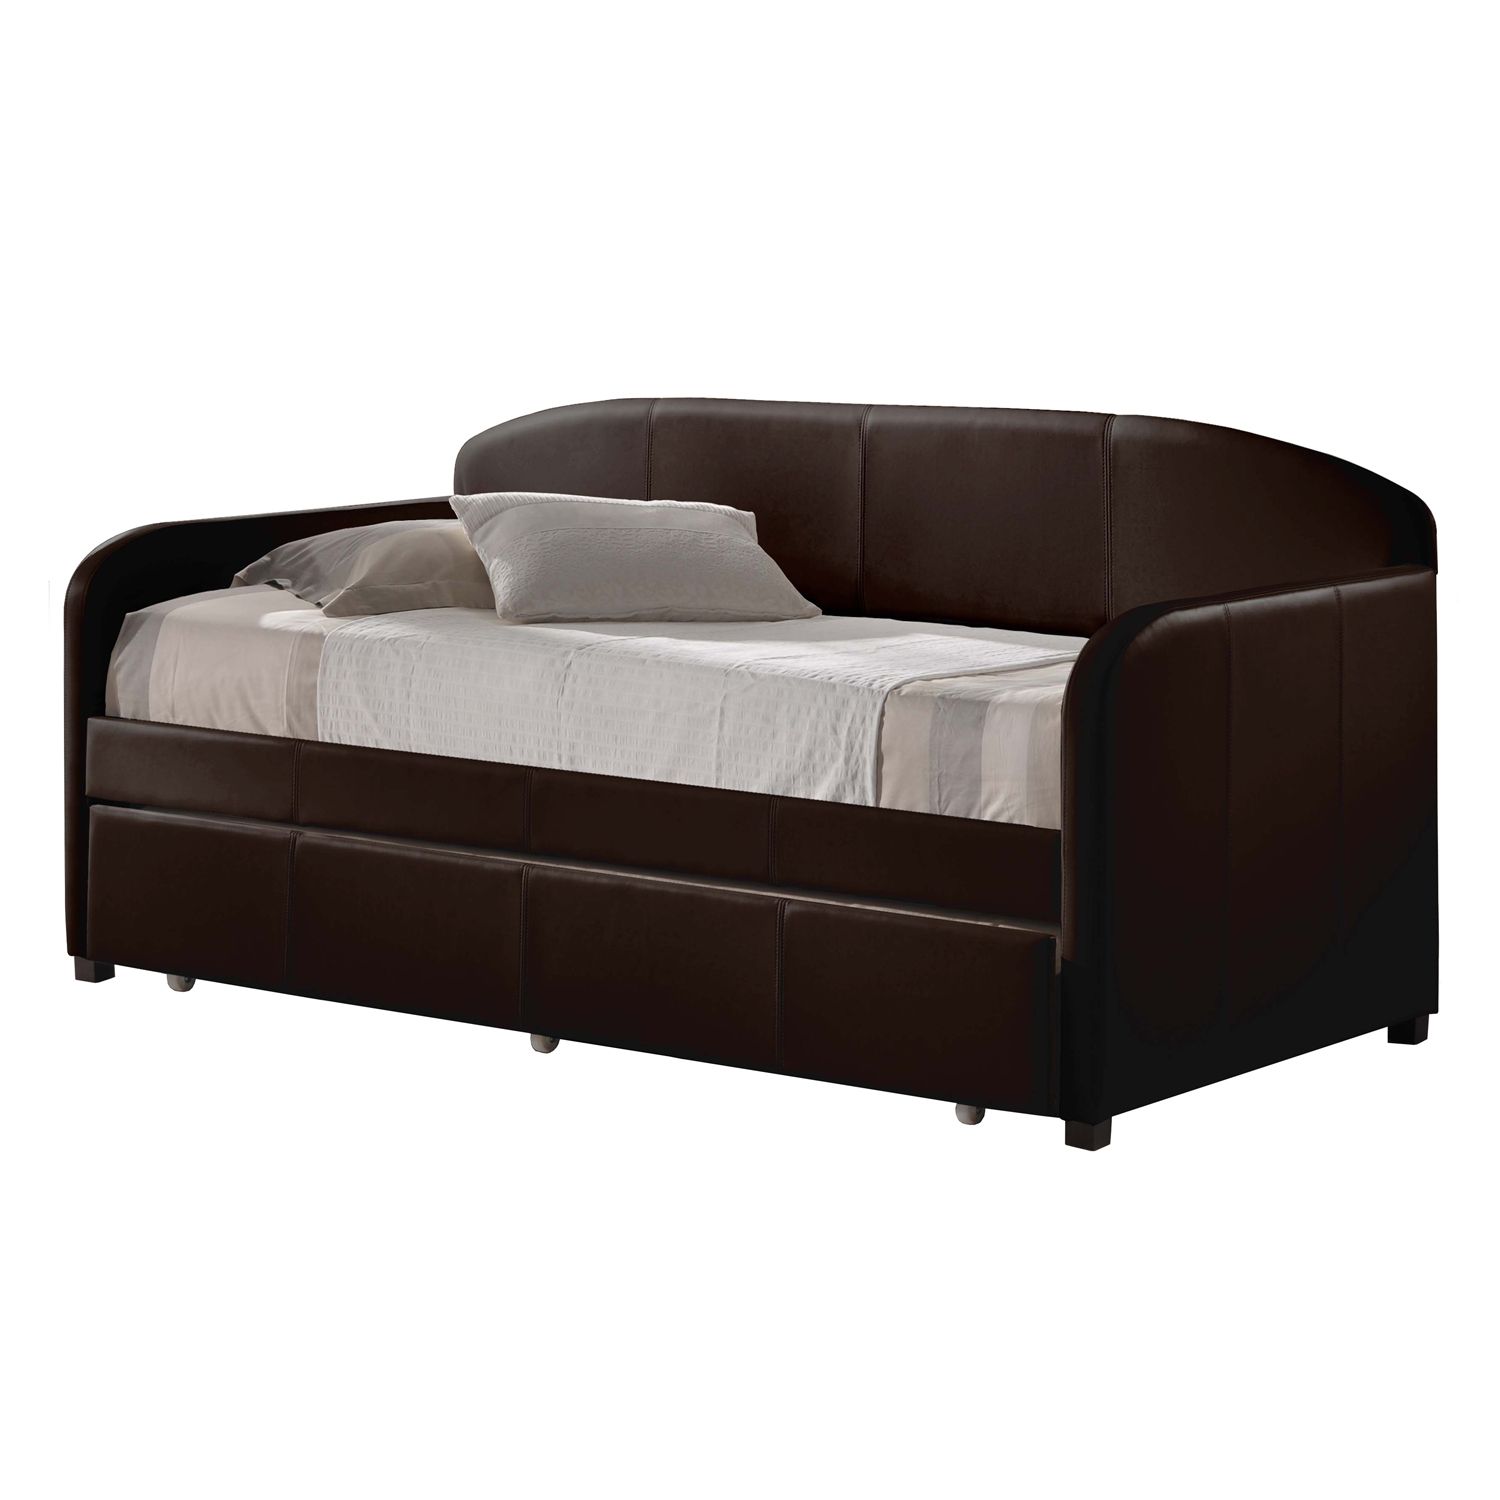 Image for Hillsdale Furniture Springfield Daybed & Trundle at Kohl's.